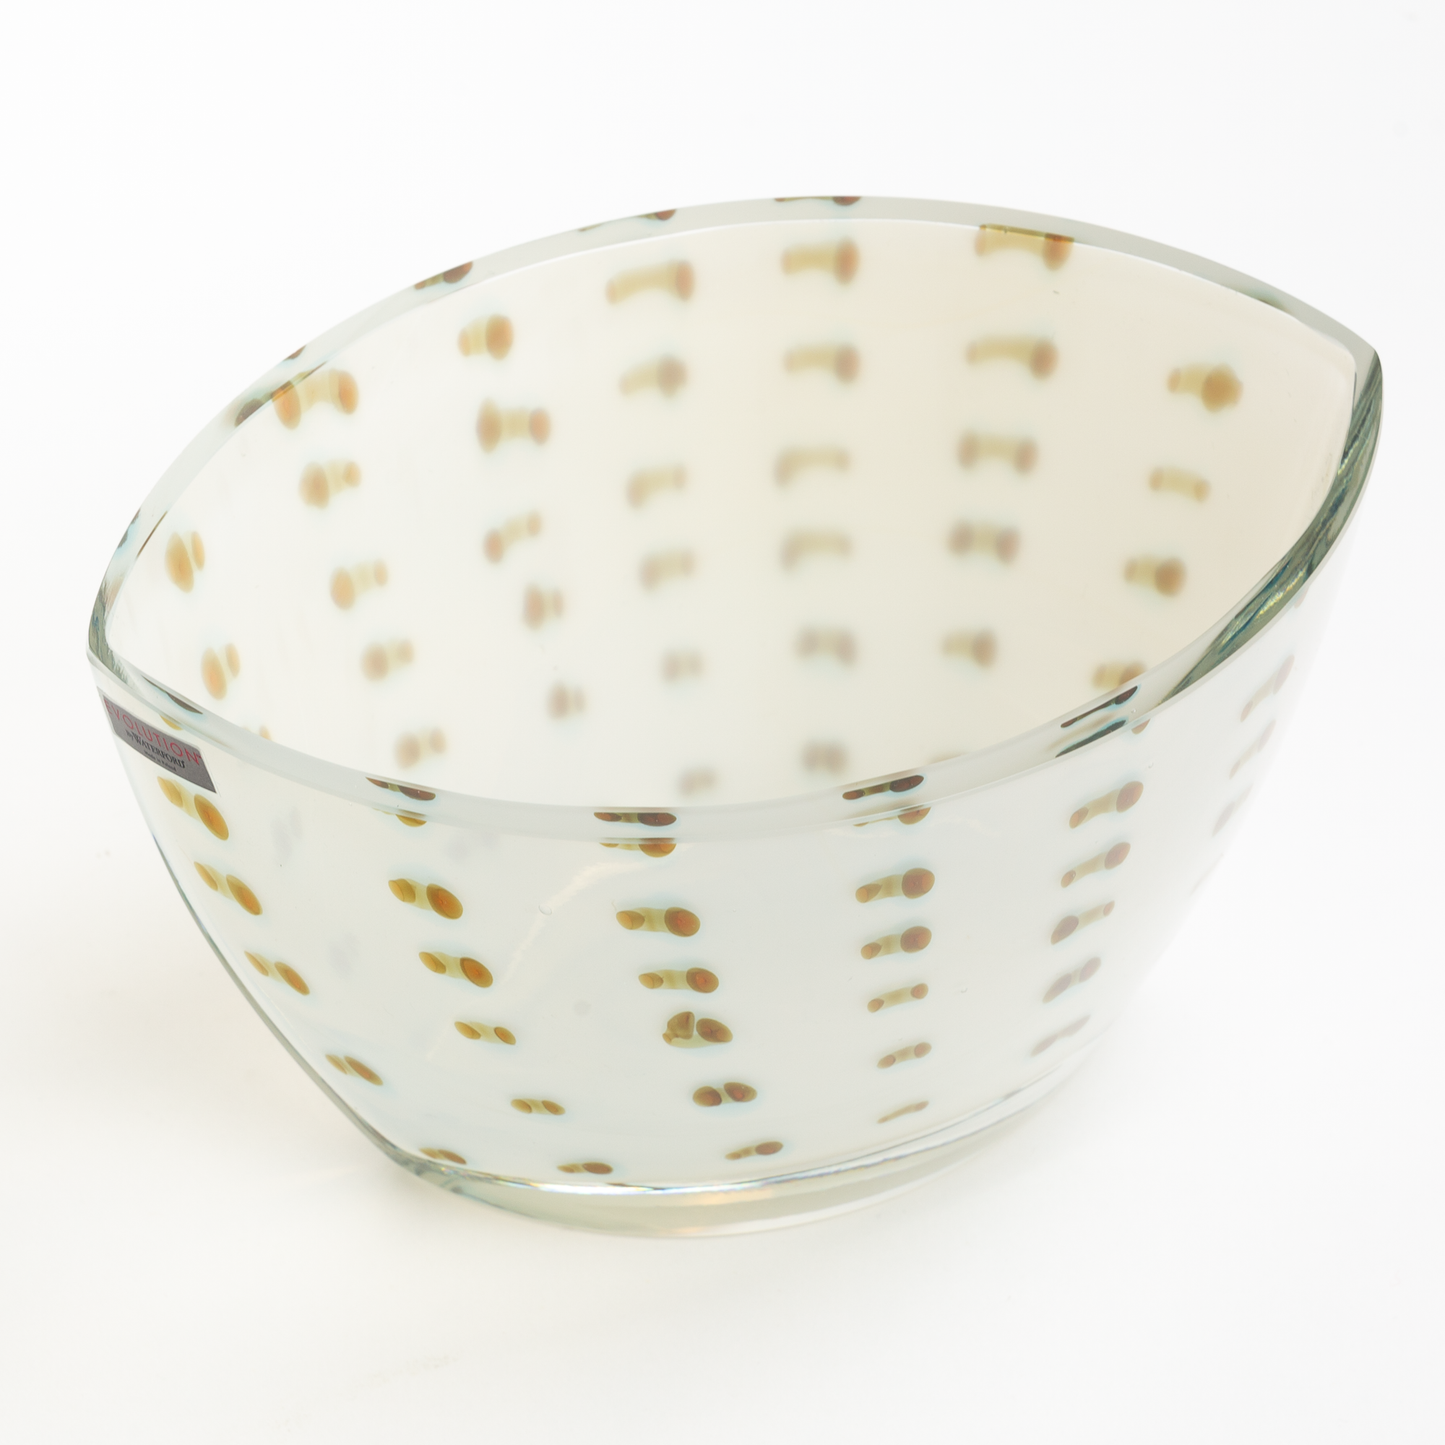 Glass Bowl - Cream with Brown Dots